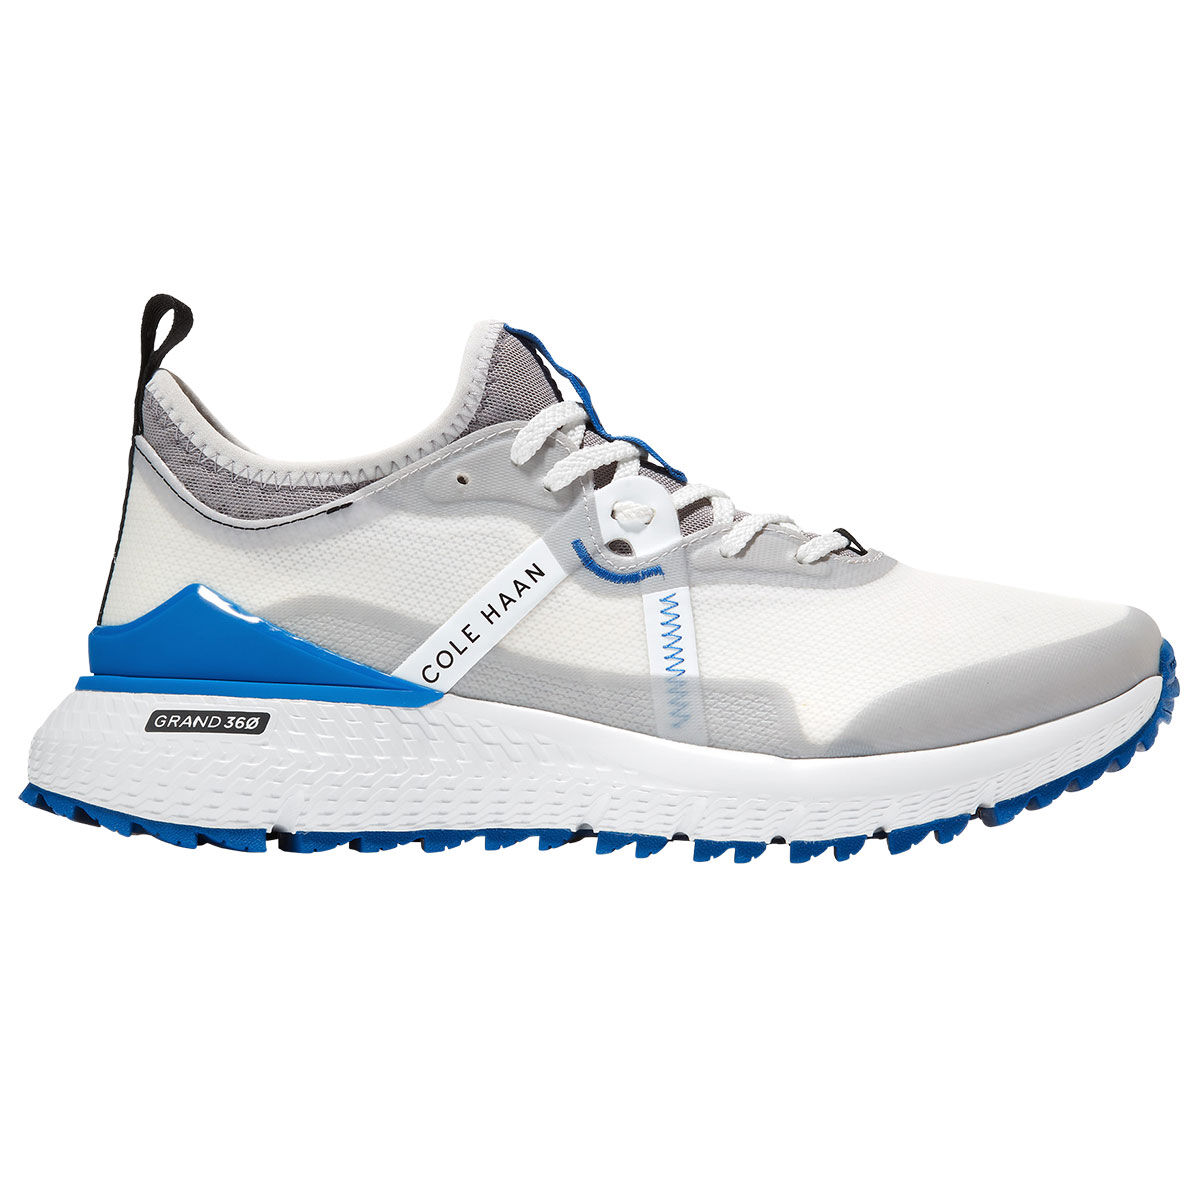 Cole Haan Men’s ZEROGRAND Overtake Spikeless Golf Shoes, Mens, Microchip/lapis blue/white, 7 | American Golf